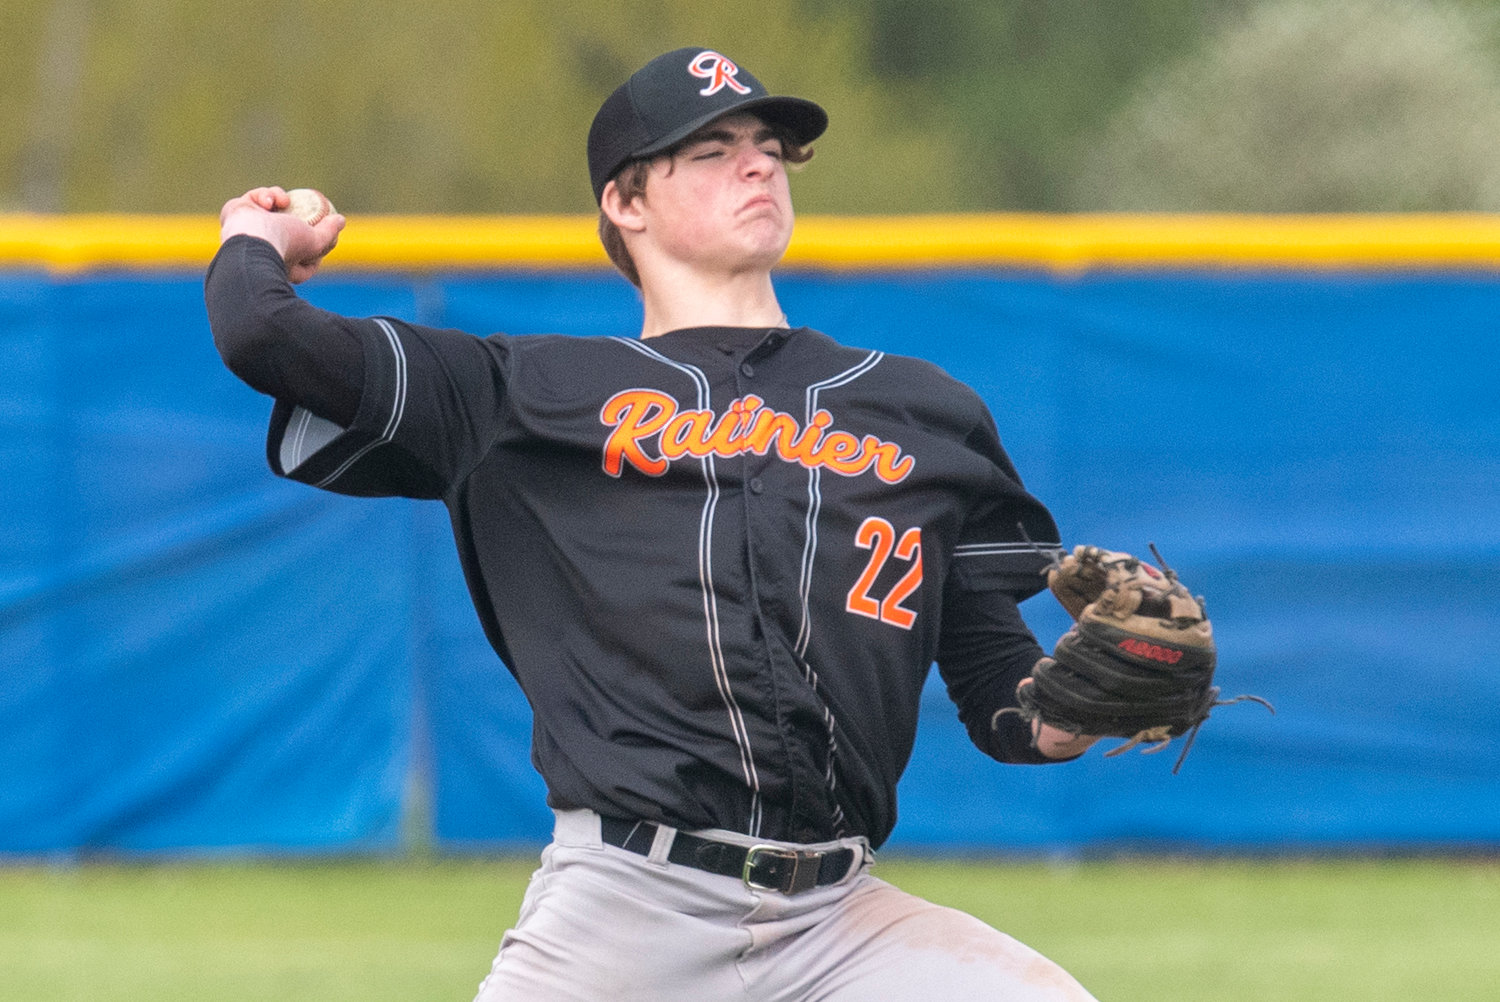 Rainier third baseman Hunter Howell makes a throw to first during a district play-in game on May 3 in Adna.